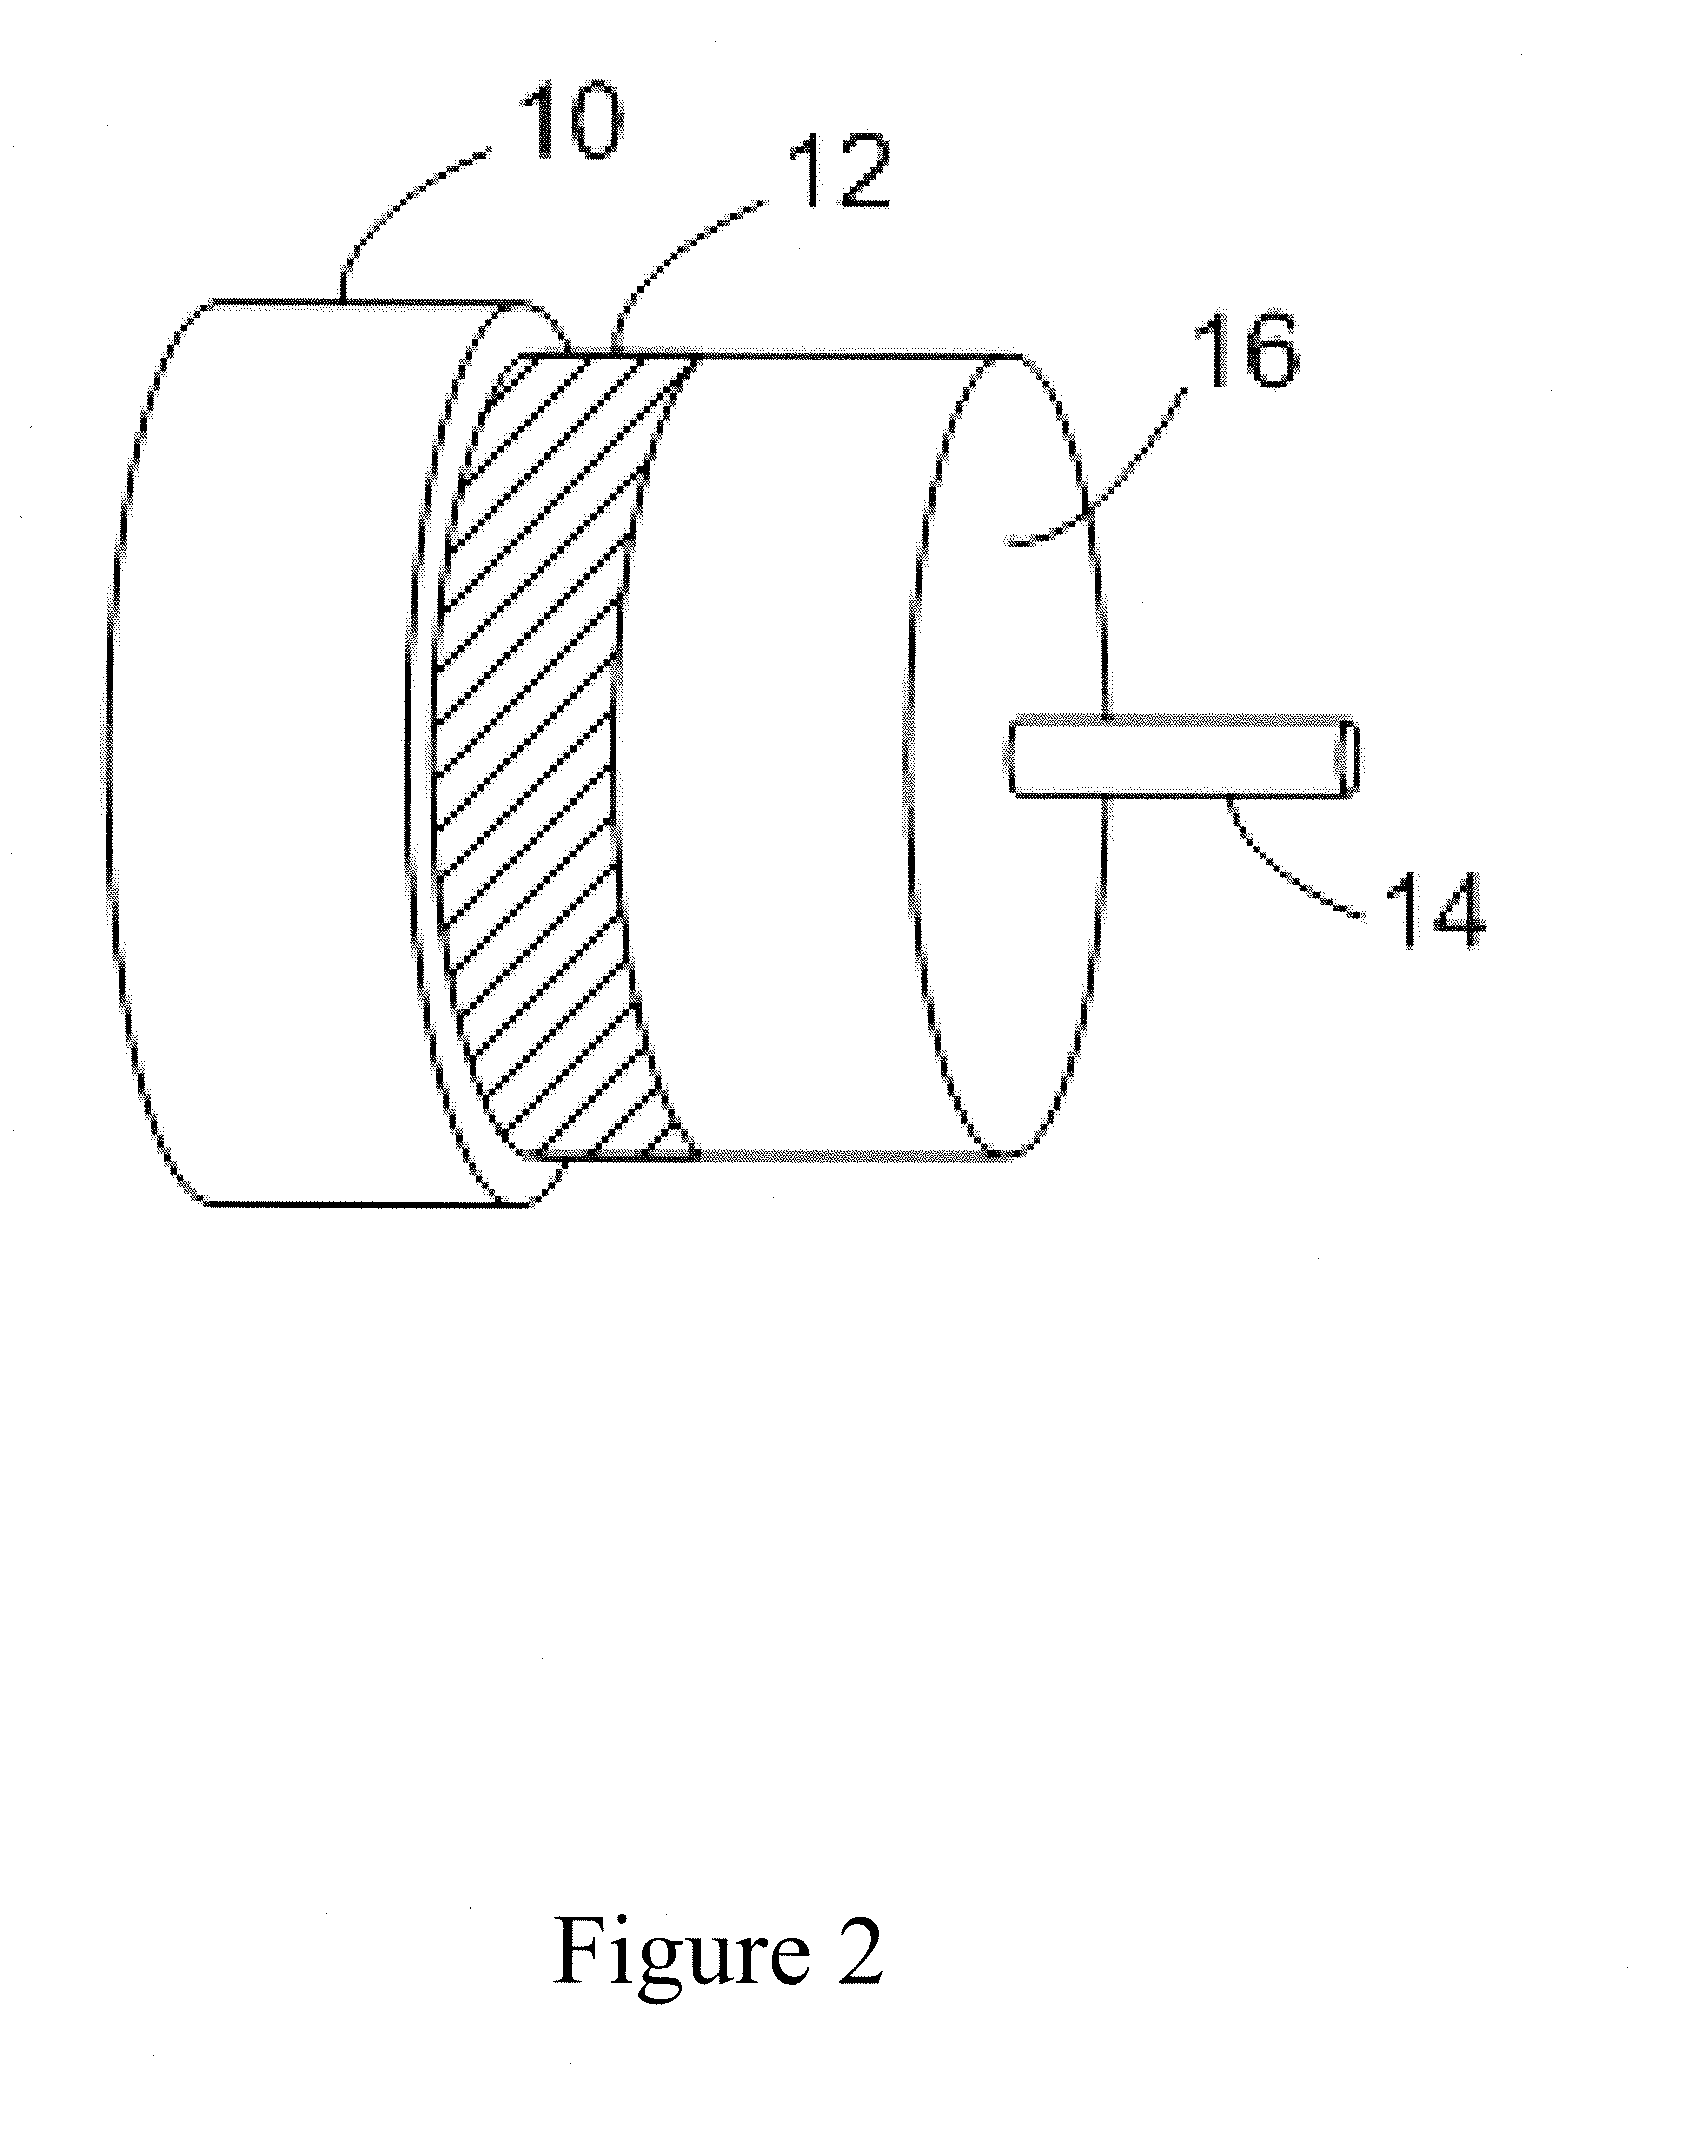 Pipeline instrumentation and control system